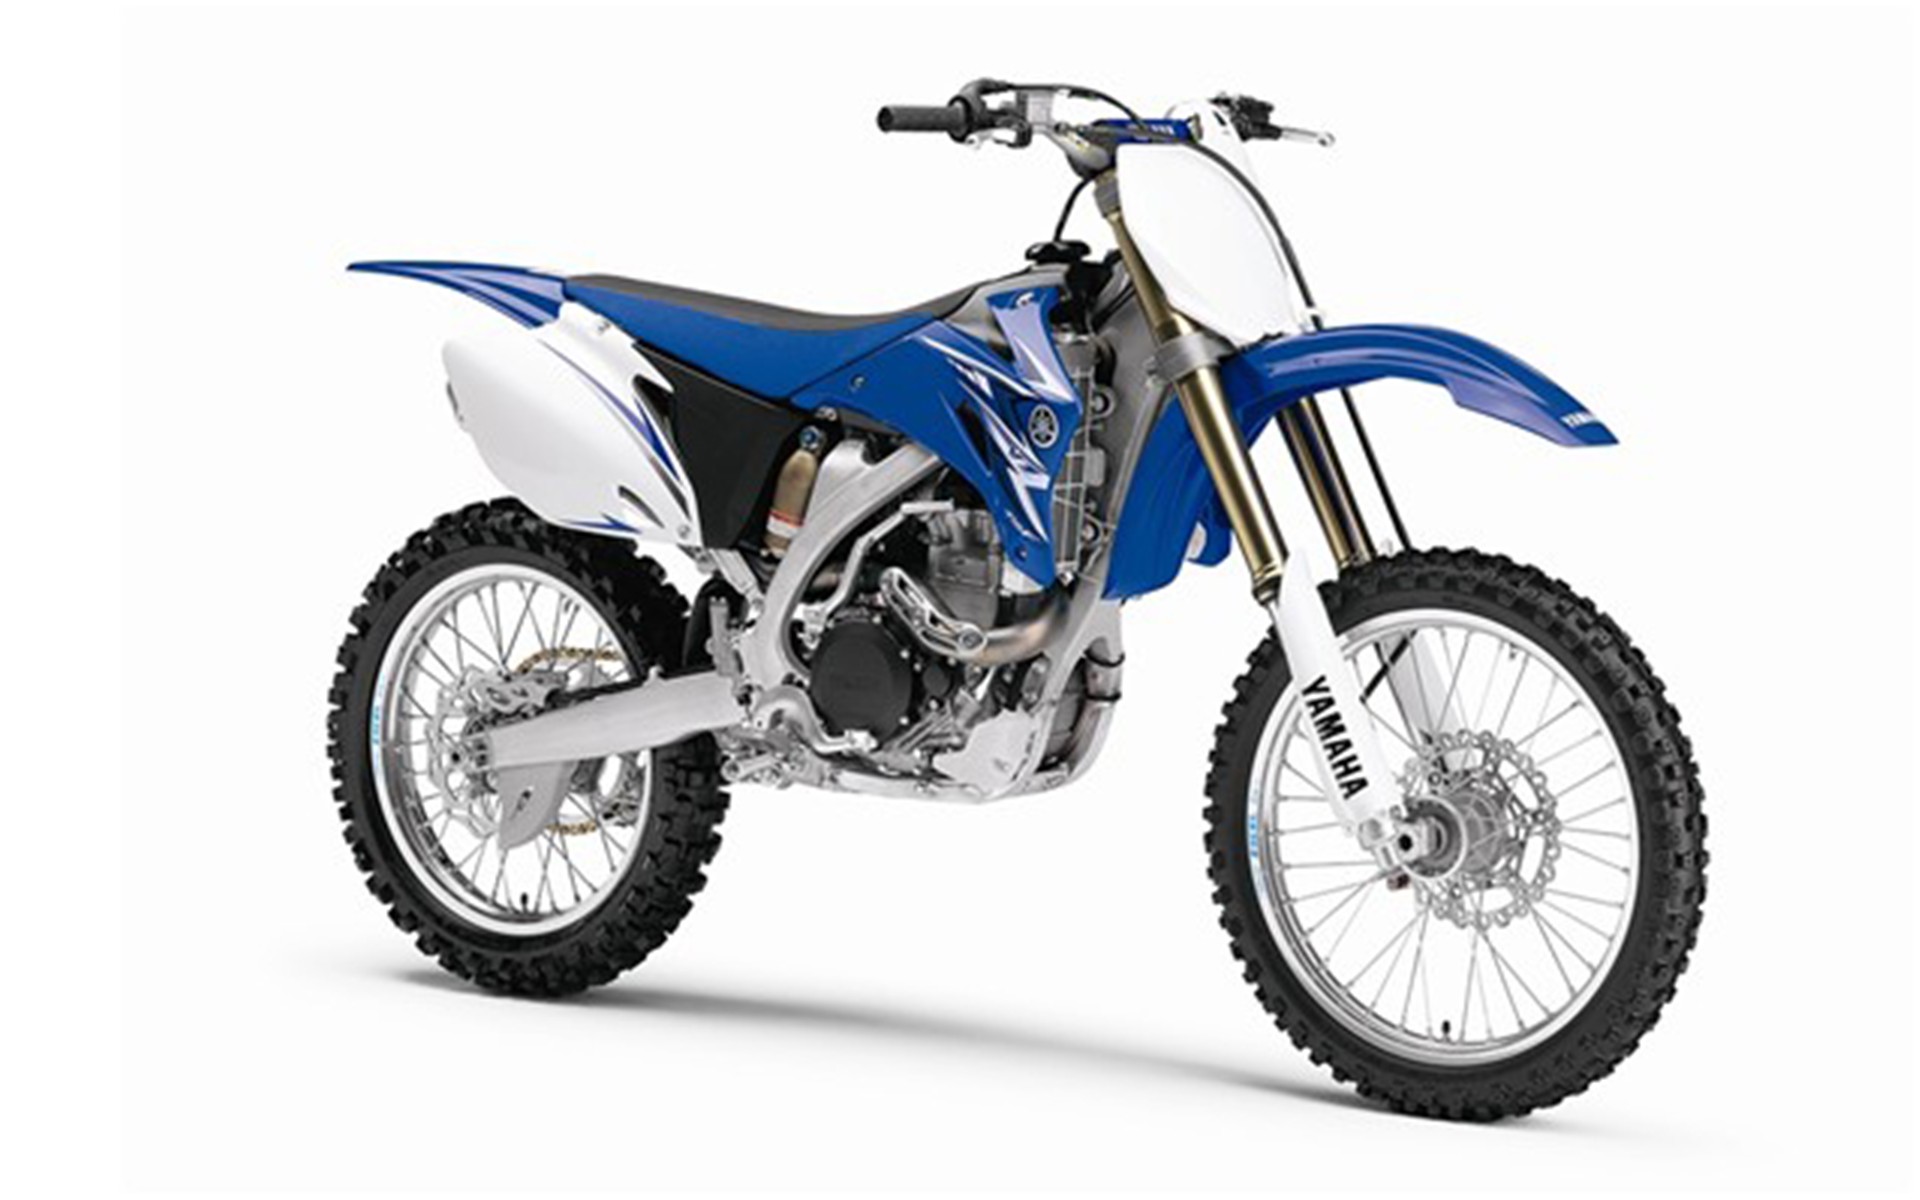 Yz450f 4K wallpapers for your desktop or mobile screen free and